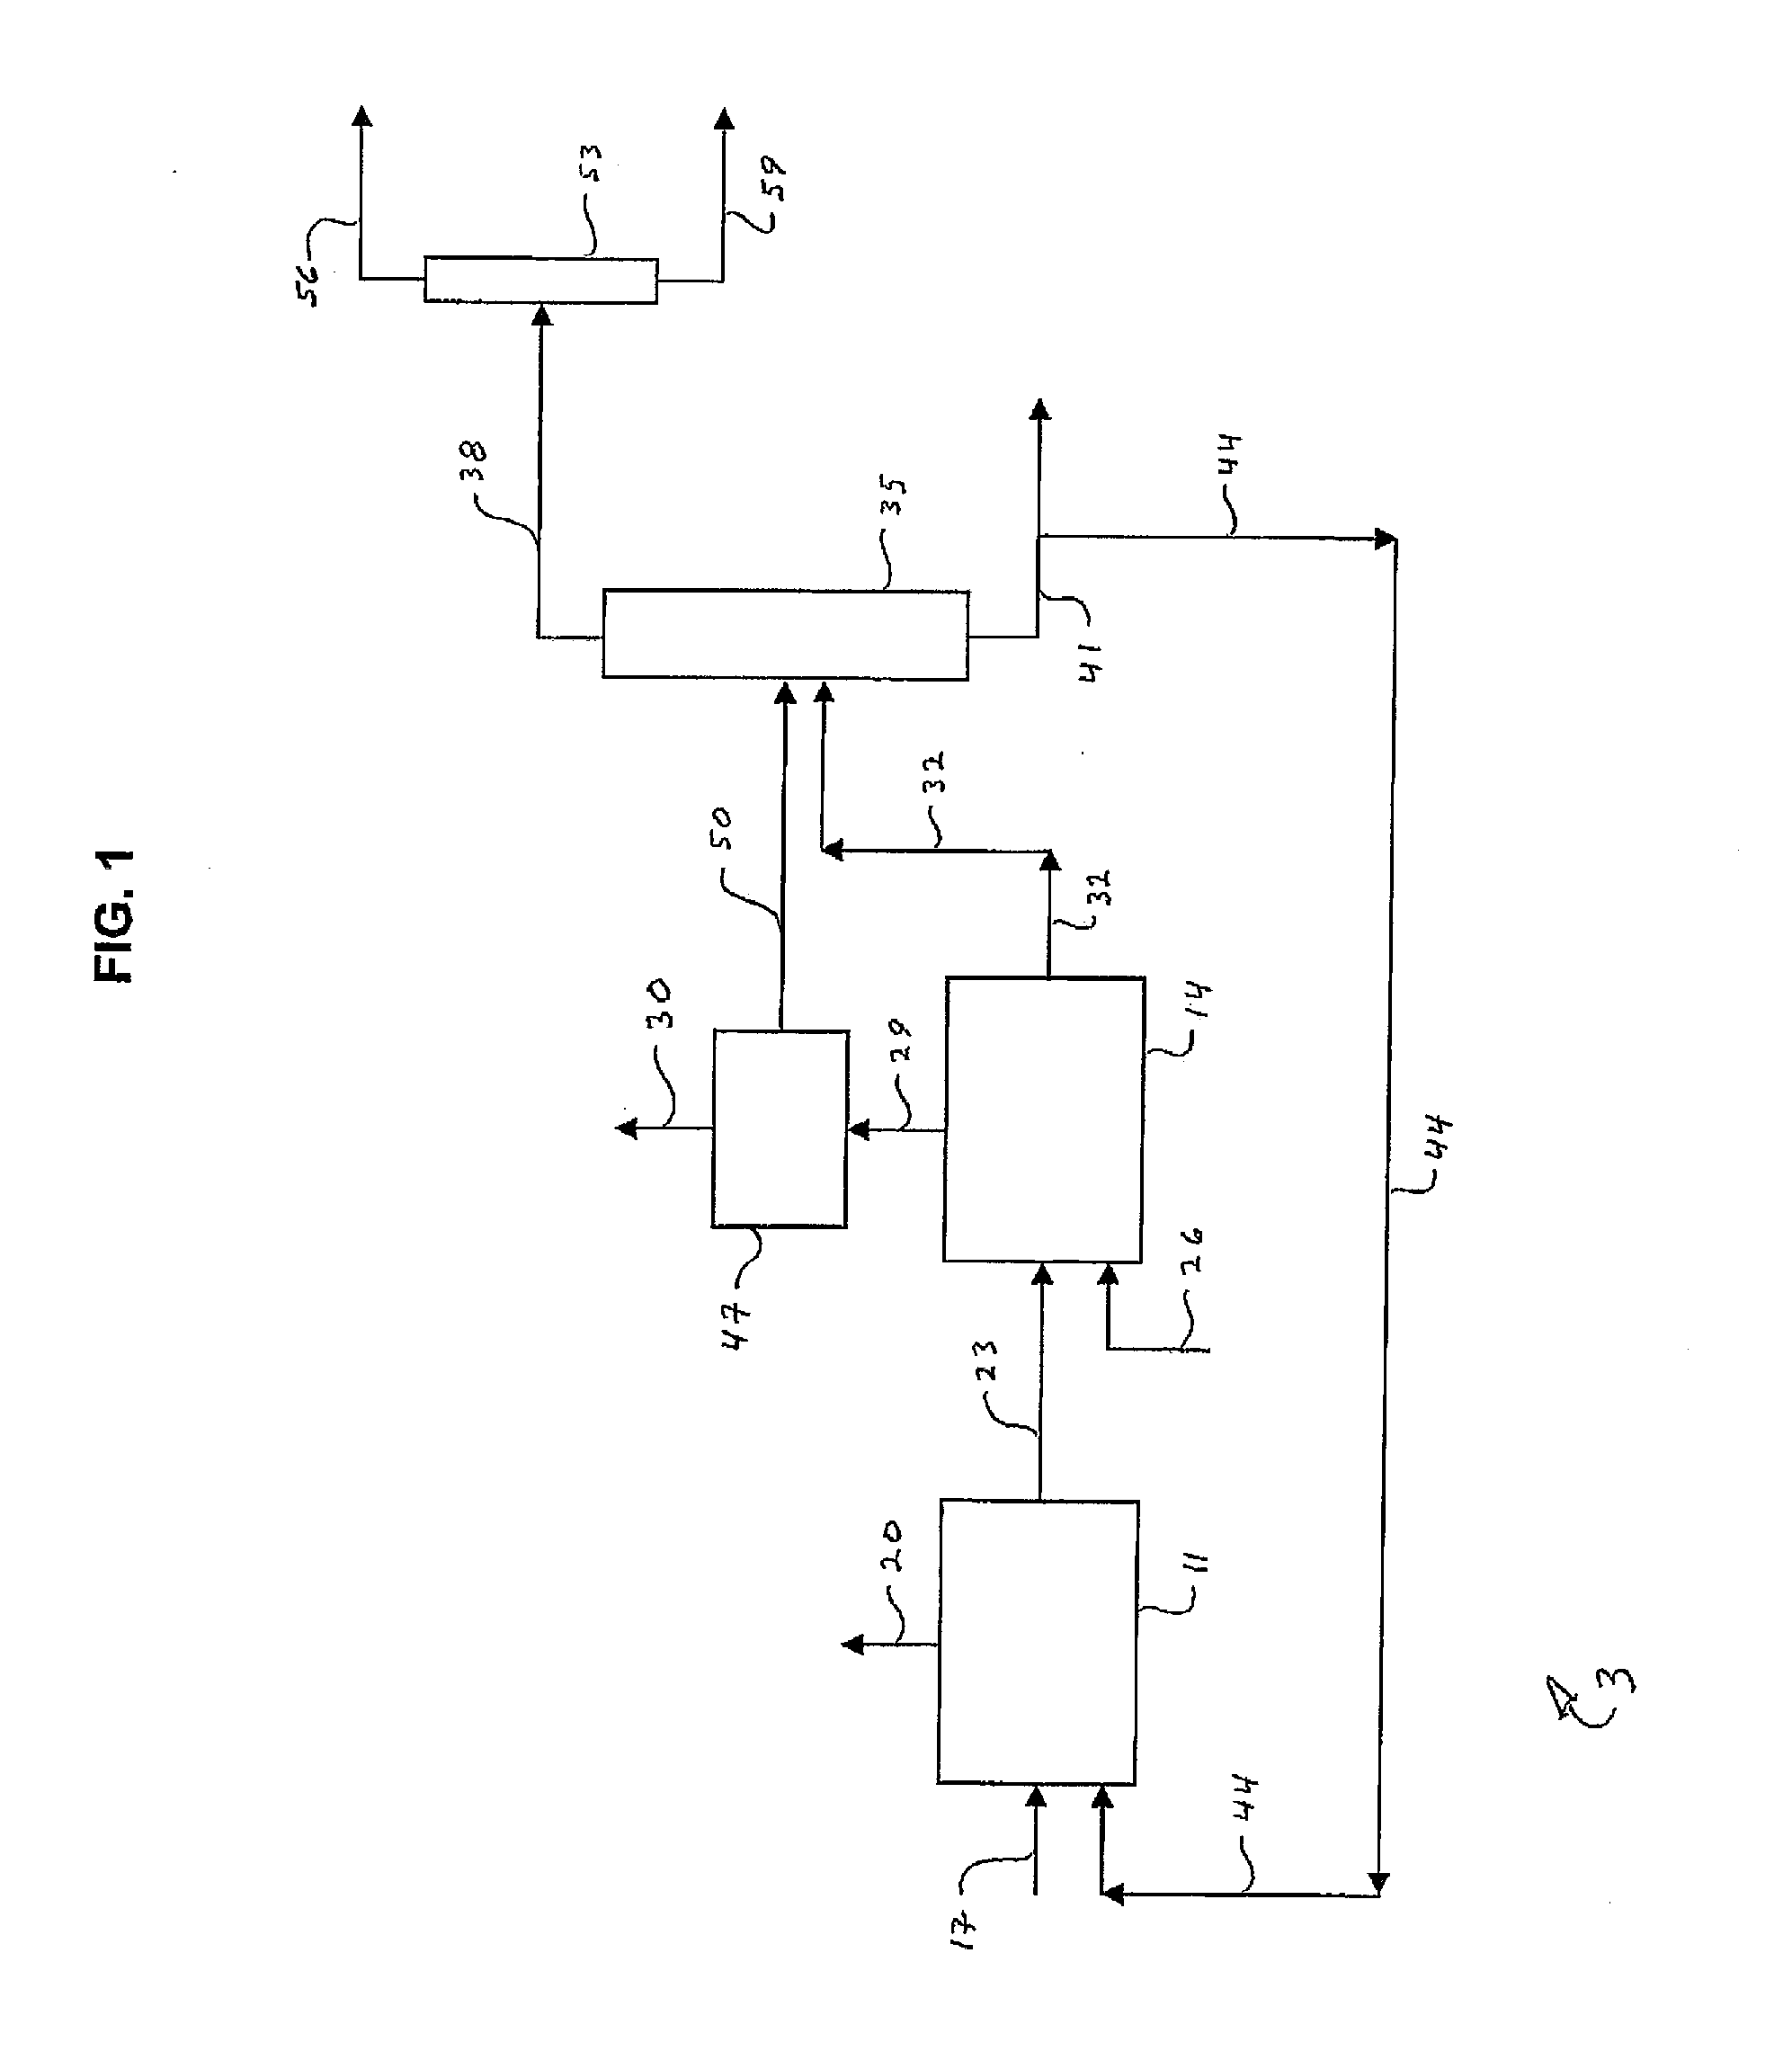 Processes for Producing Chlorinated Hydrocarbons and Methods for Recovering Polyvalent Antimony Catalysts Therefrom